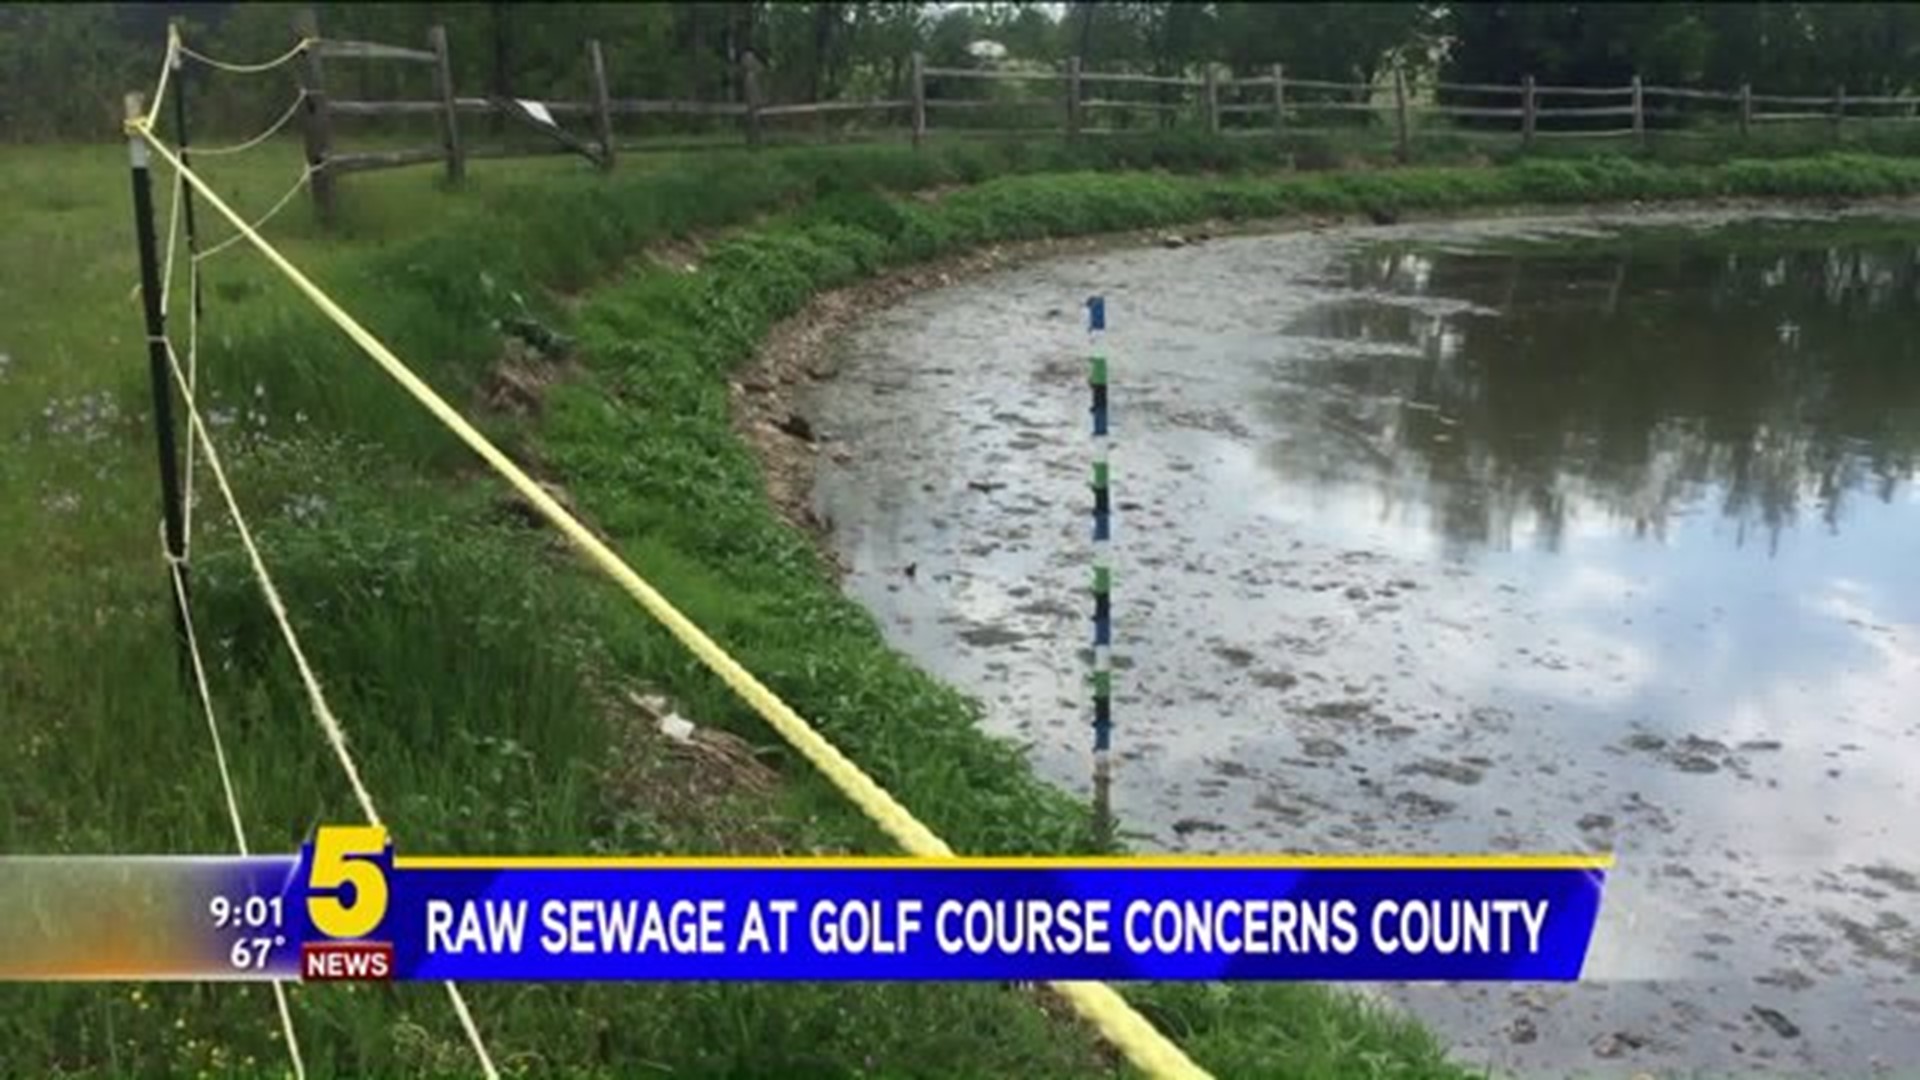 Debate Over Aeration Cell Concerns County